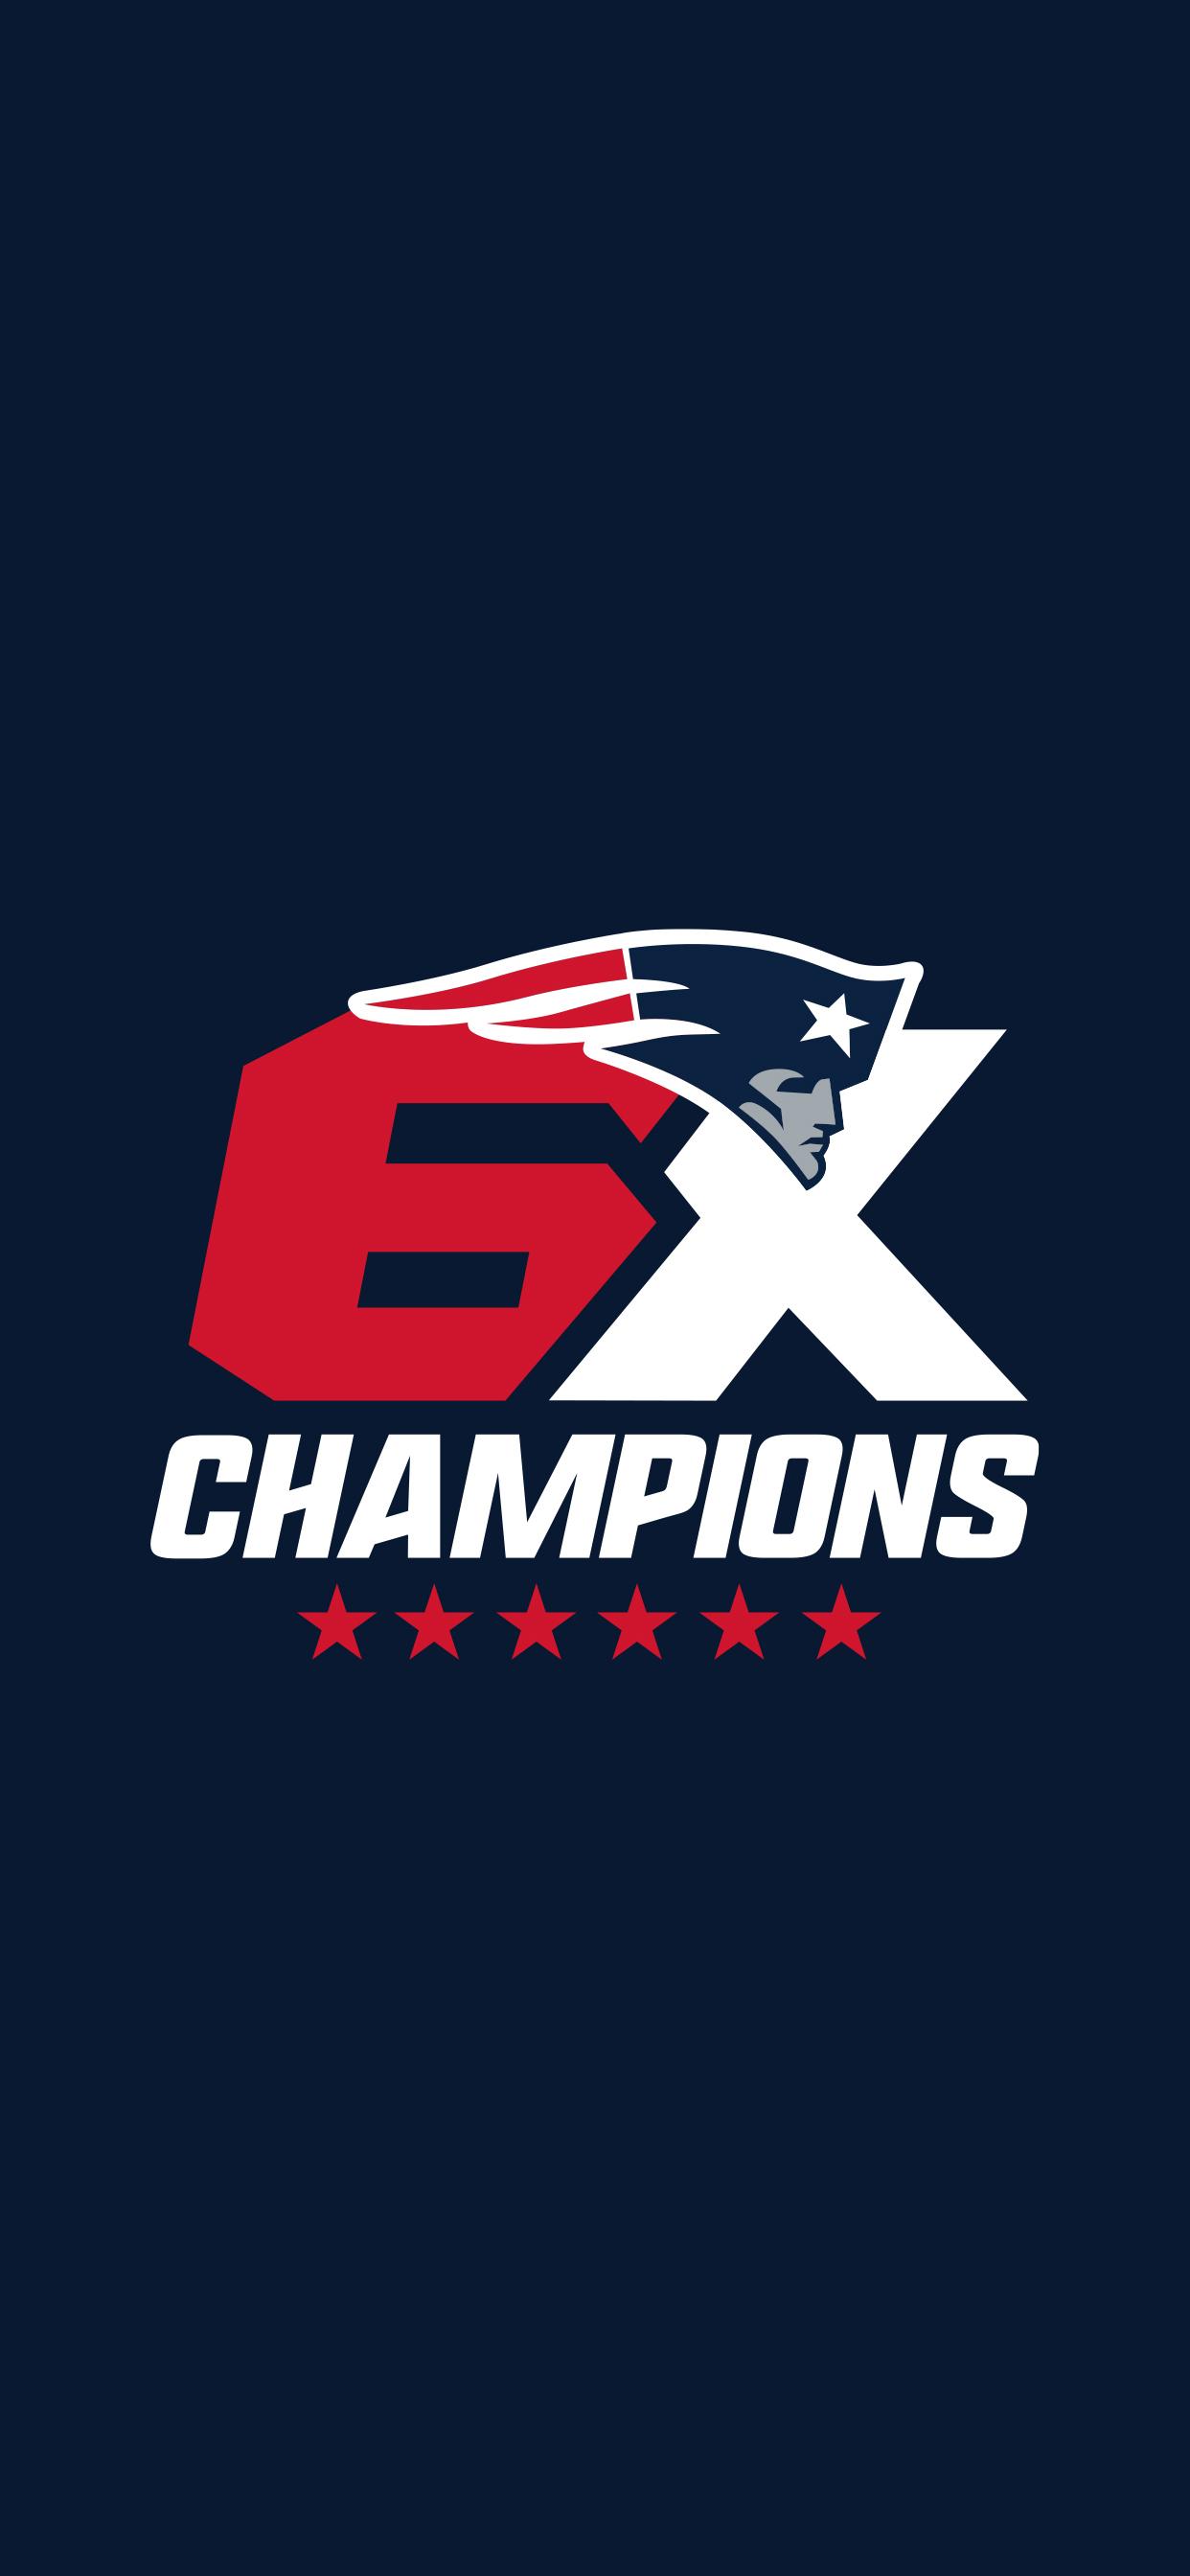 Made The 6x Champions Logo Into An iPhone Wallpaper Patriots